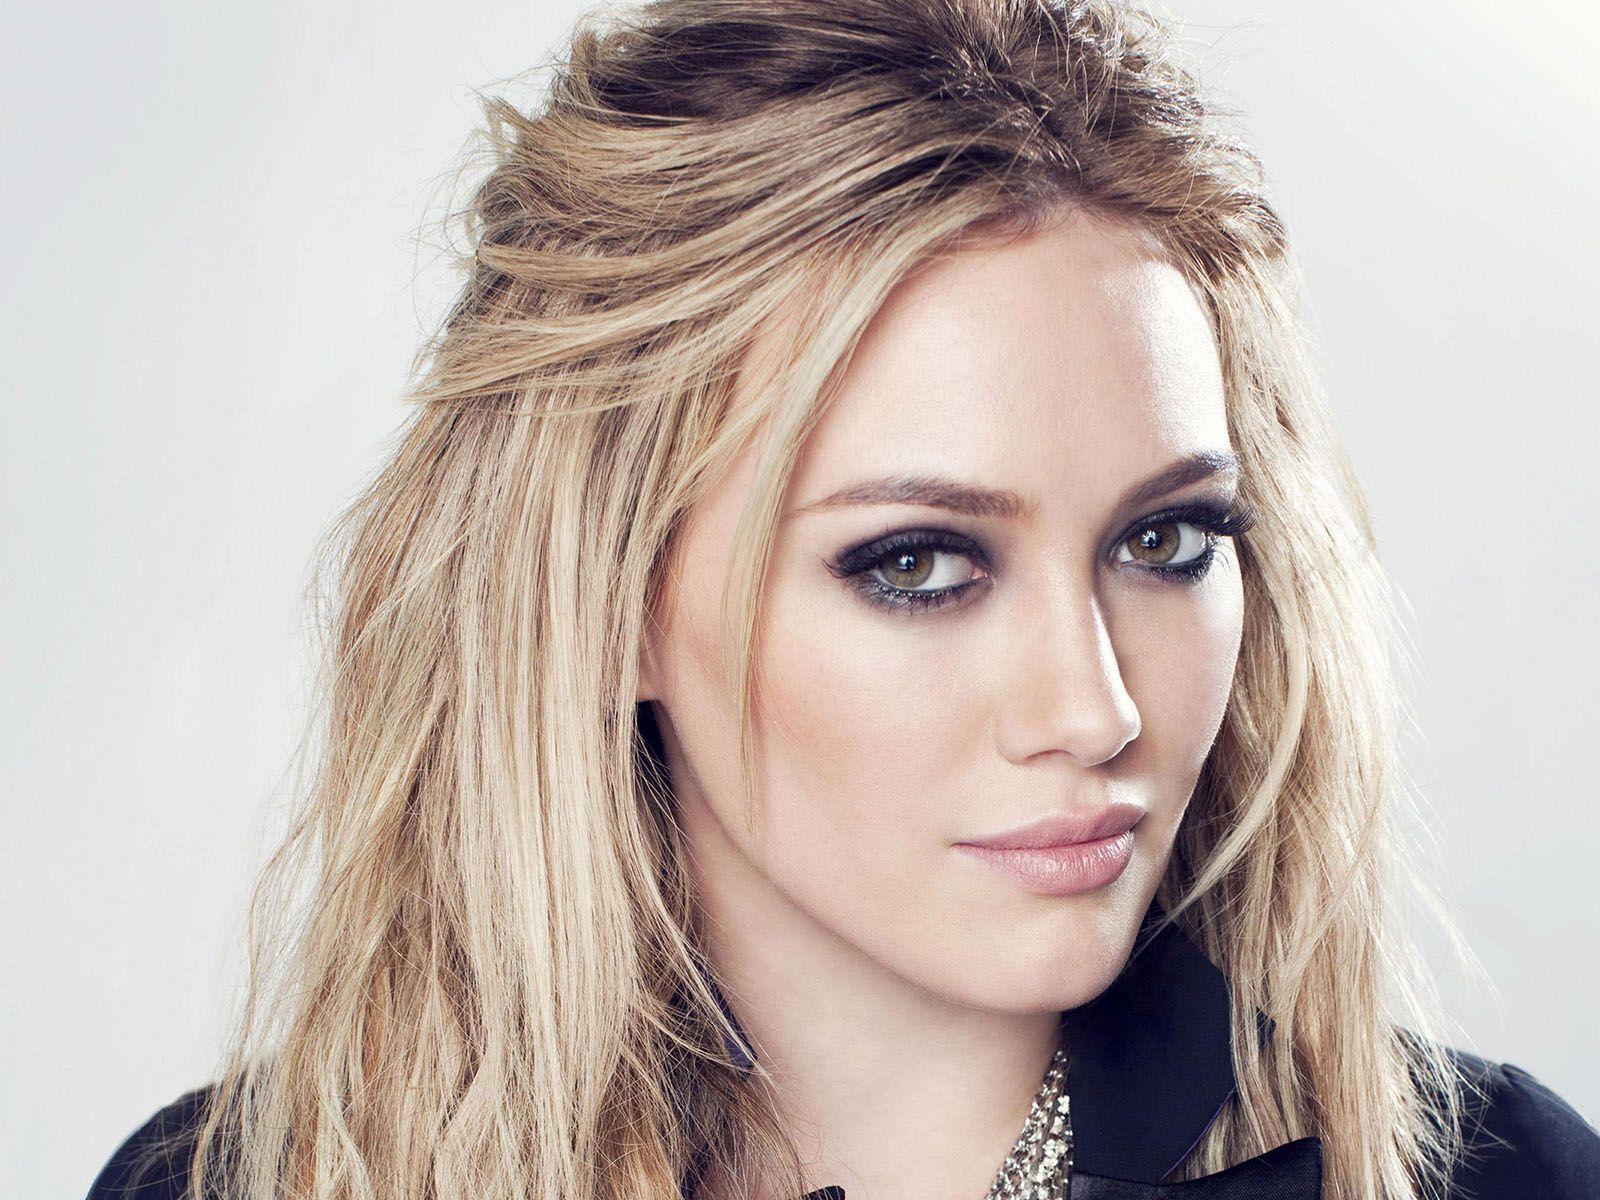 Hilary Duff Wallpaper, Posters, Photo and Image